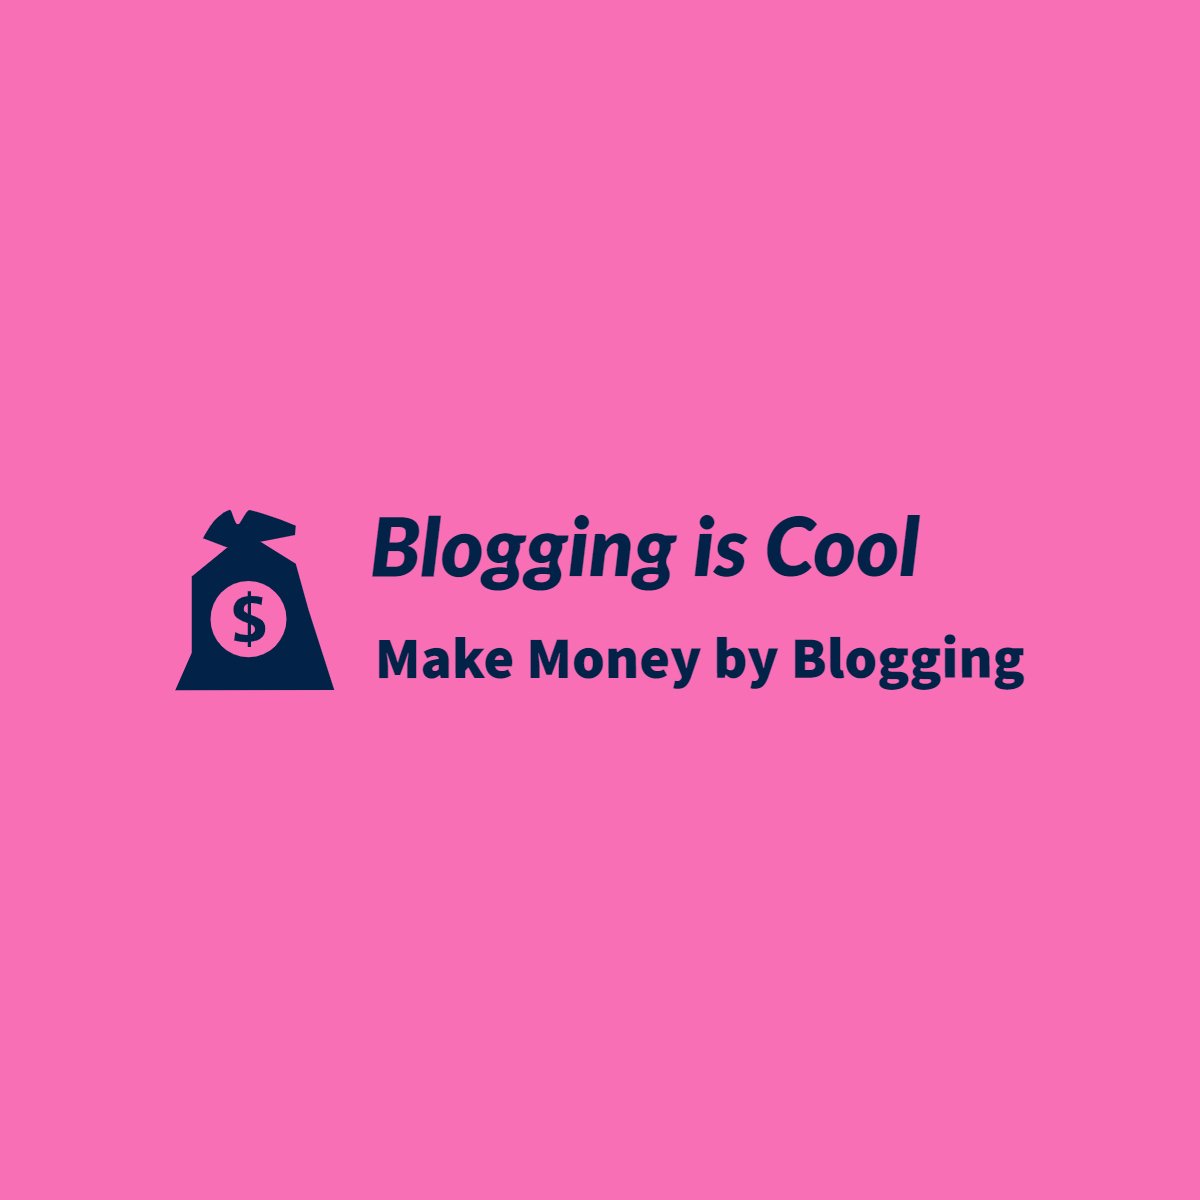 Benefits of Blogging Anonymously